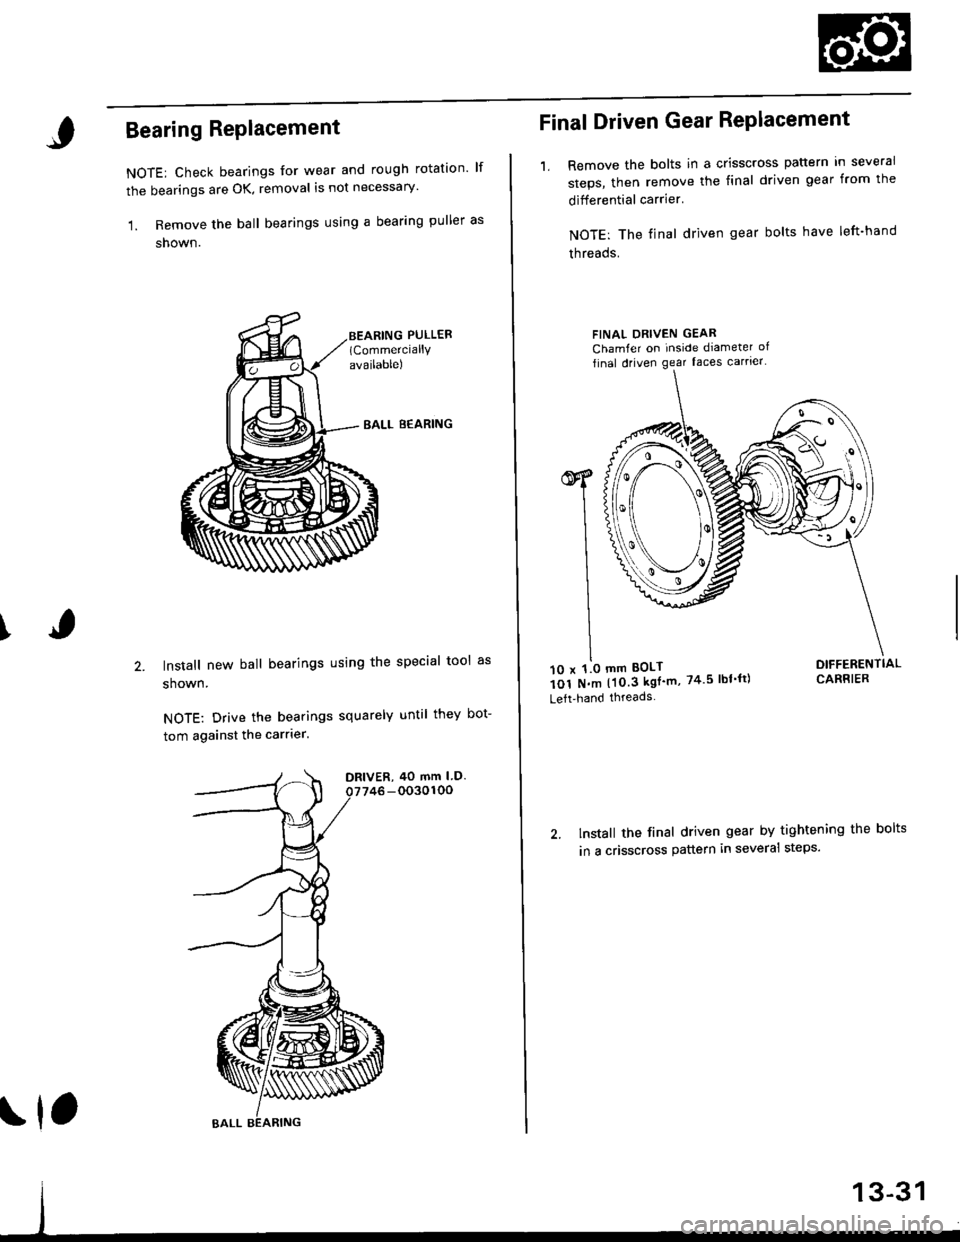 HONDA CIVIC 1999 6.G Workshop Manual I
Bearing RePlacement
NOTE: Check bearings for wear and rough rotation lf
the bearings are OK, removal is not necessary
1. Remove the ball bearings using a bearing puller as
shown.
EALL B€ARING
ln